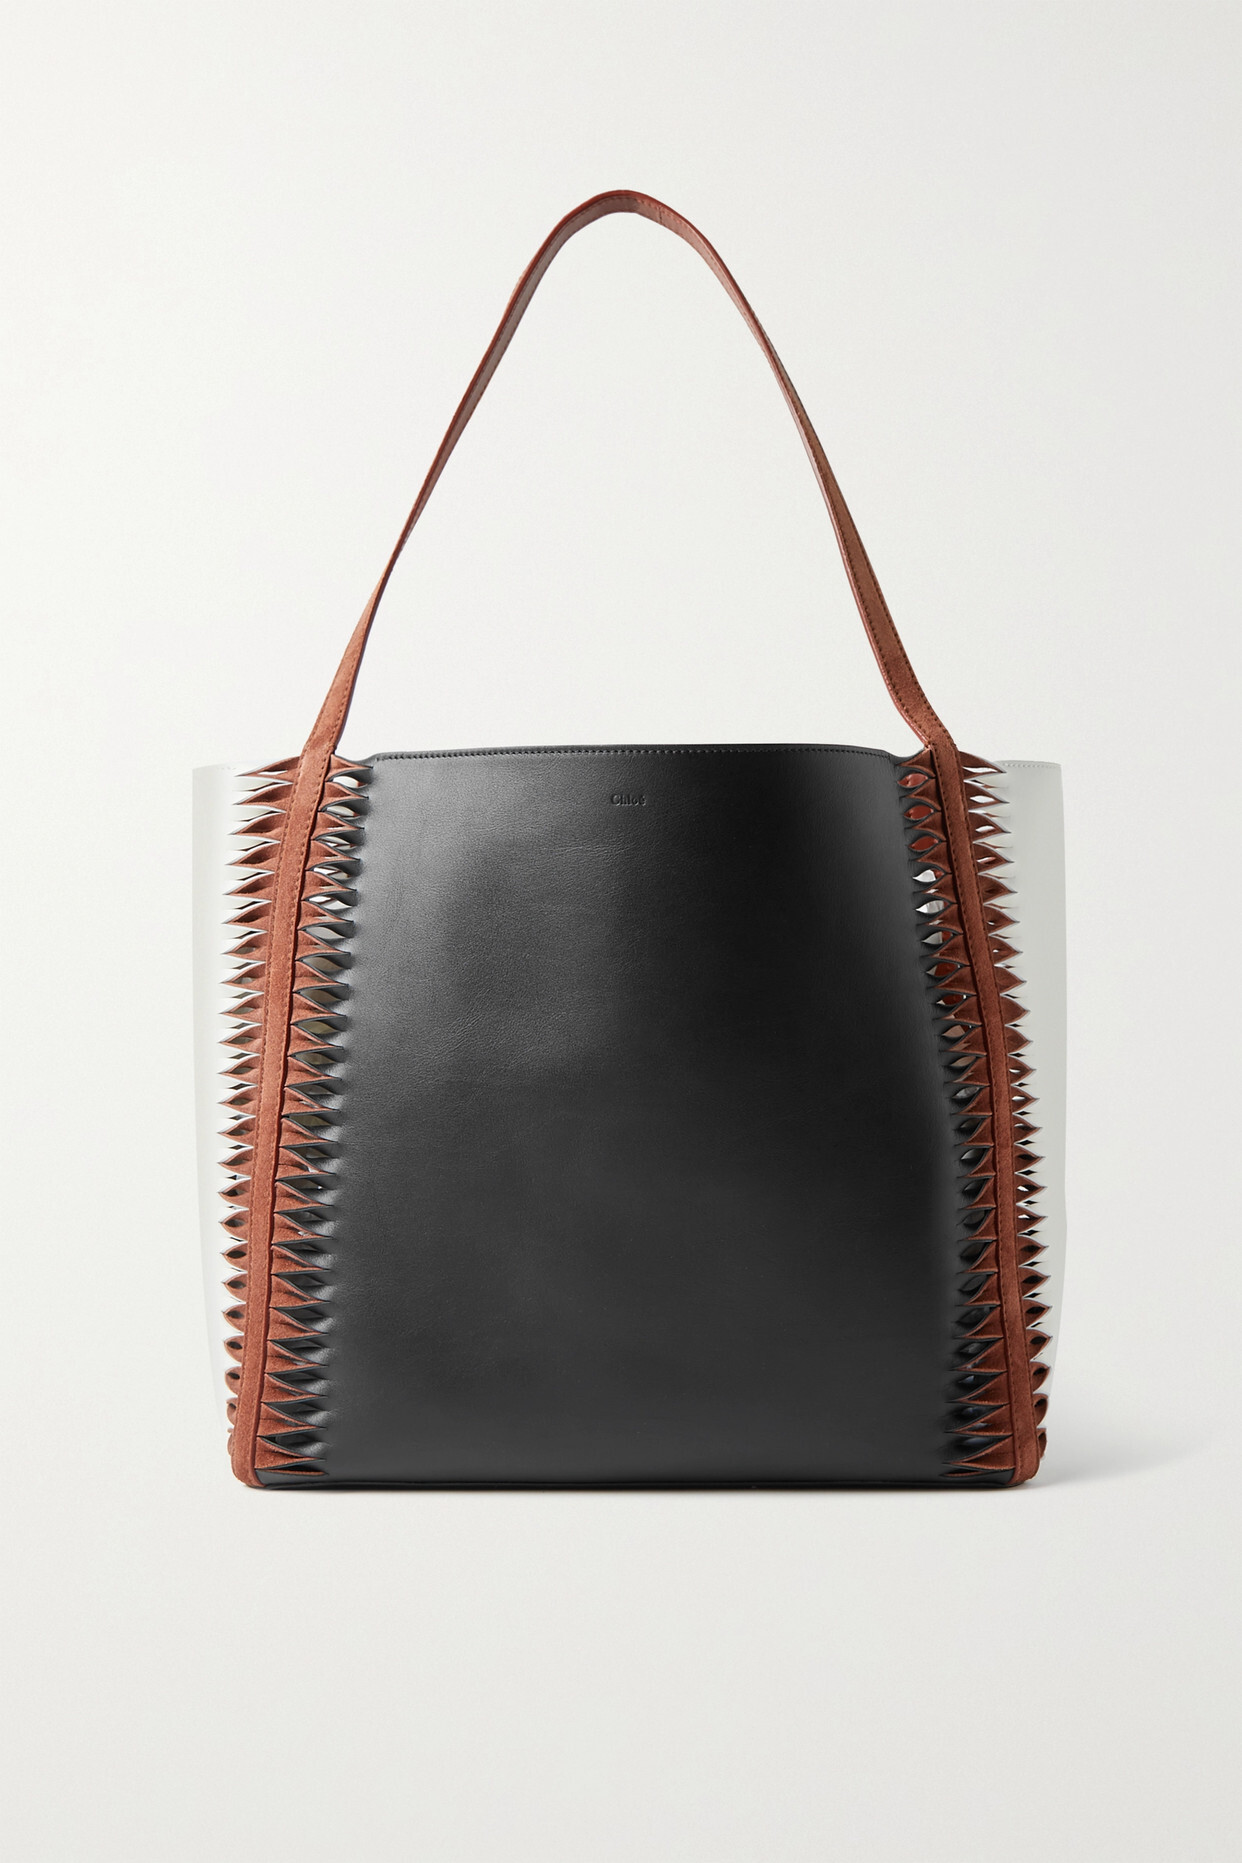 Chloé Chloé - Louela Whipstitched Leather And Suede Tote - Black